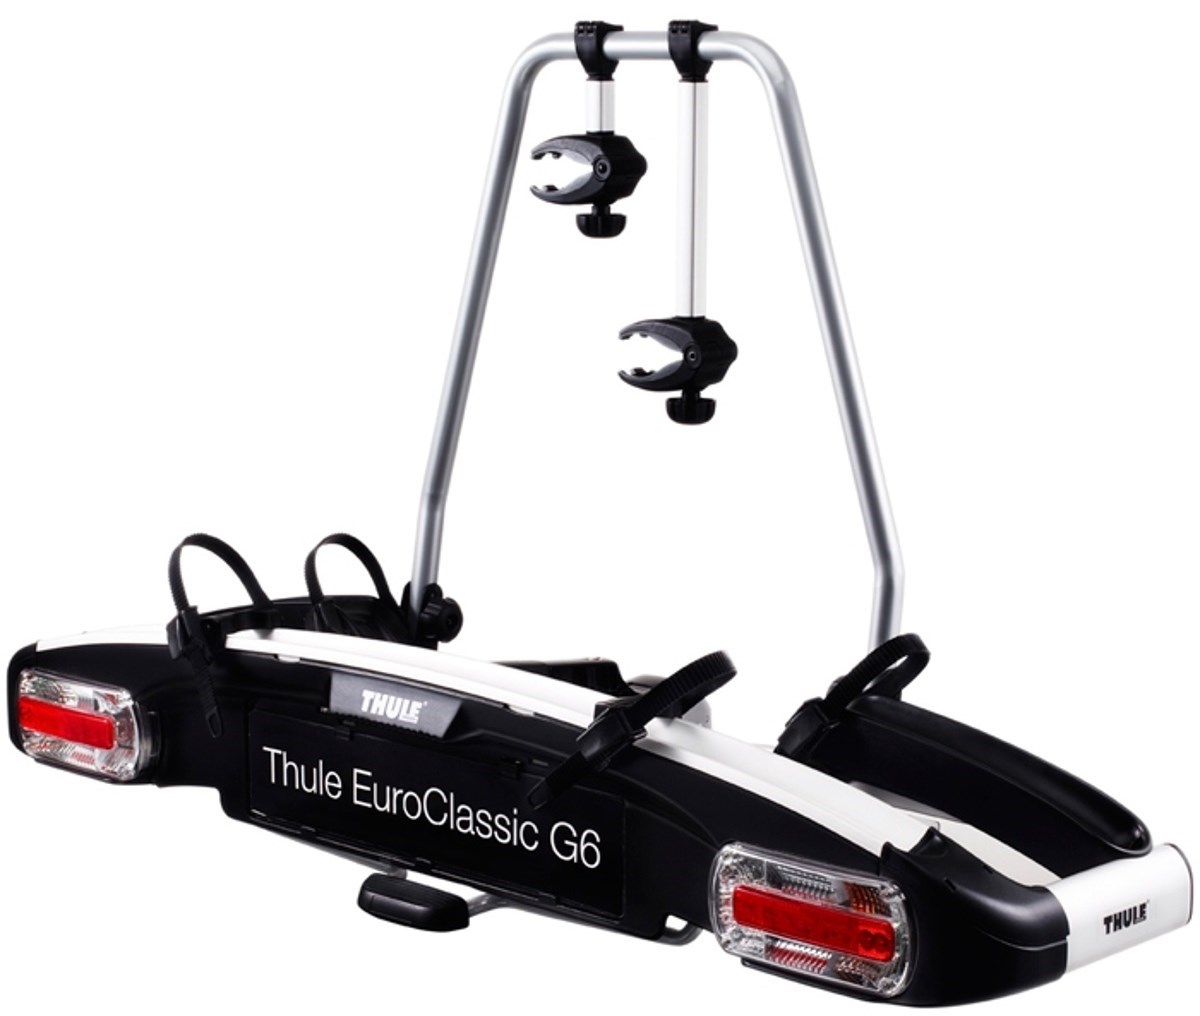 Thule 928 Euroclassic G6 2-bike towball Carrier product image